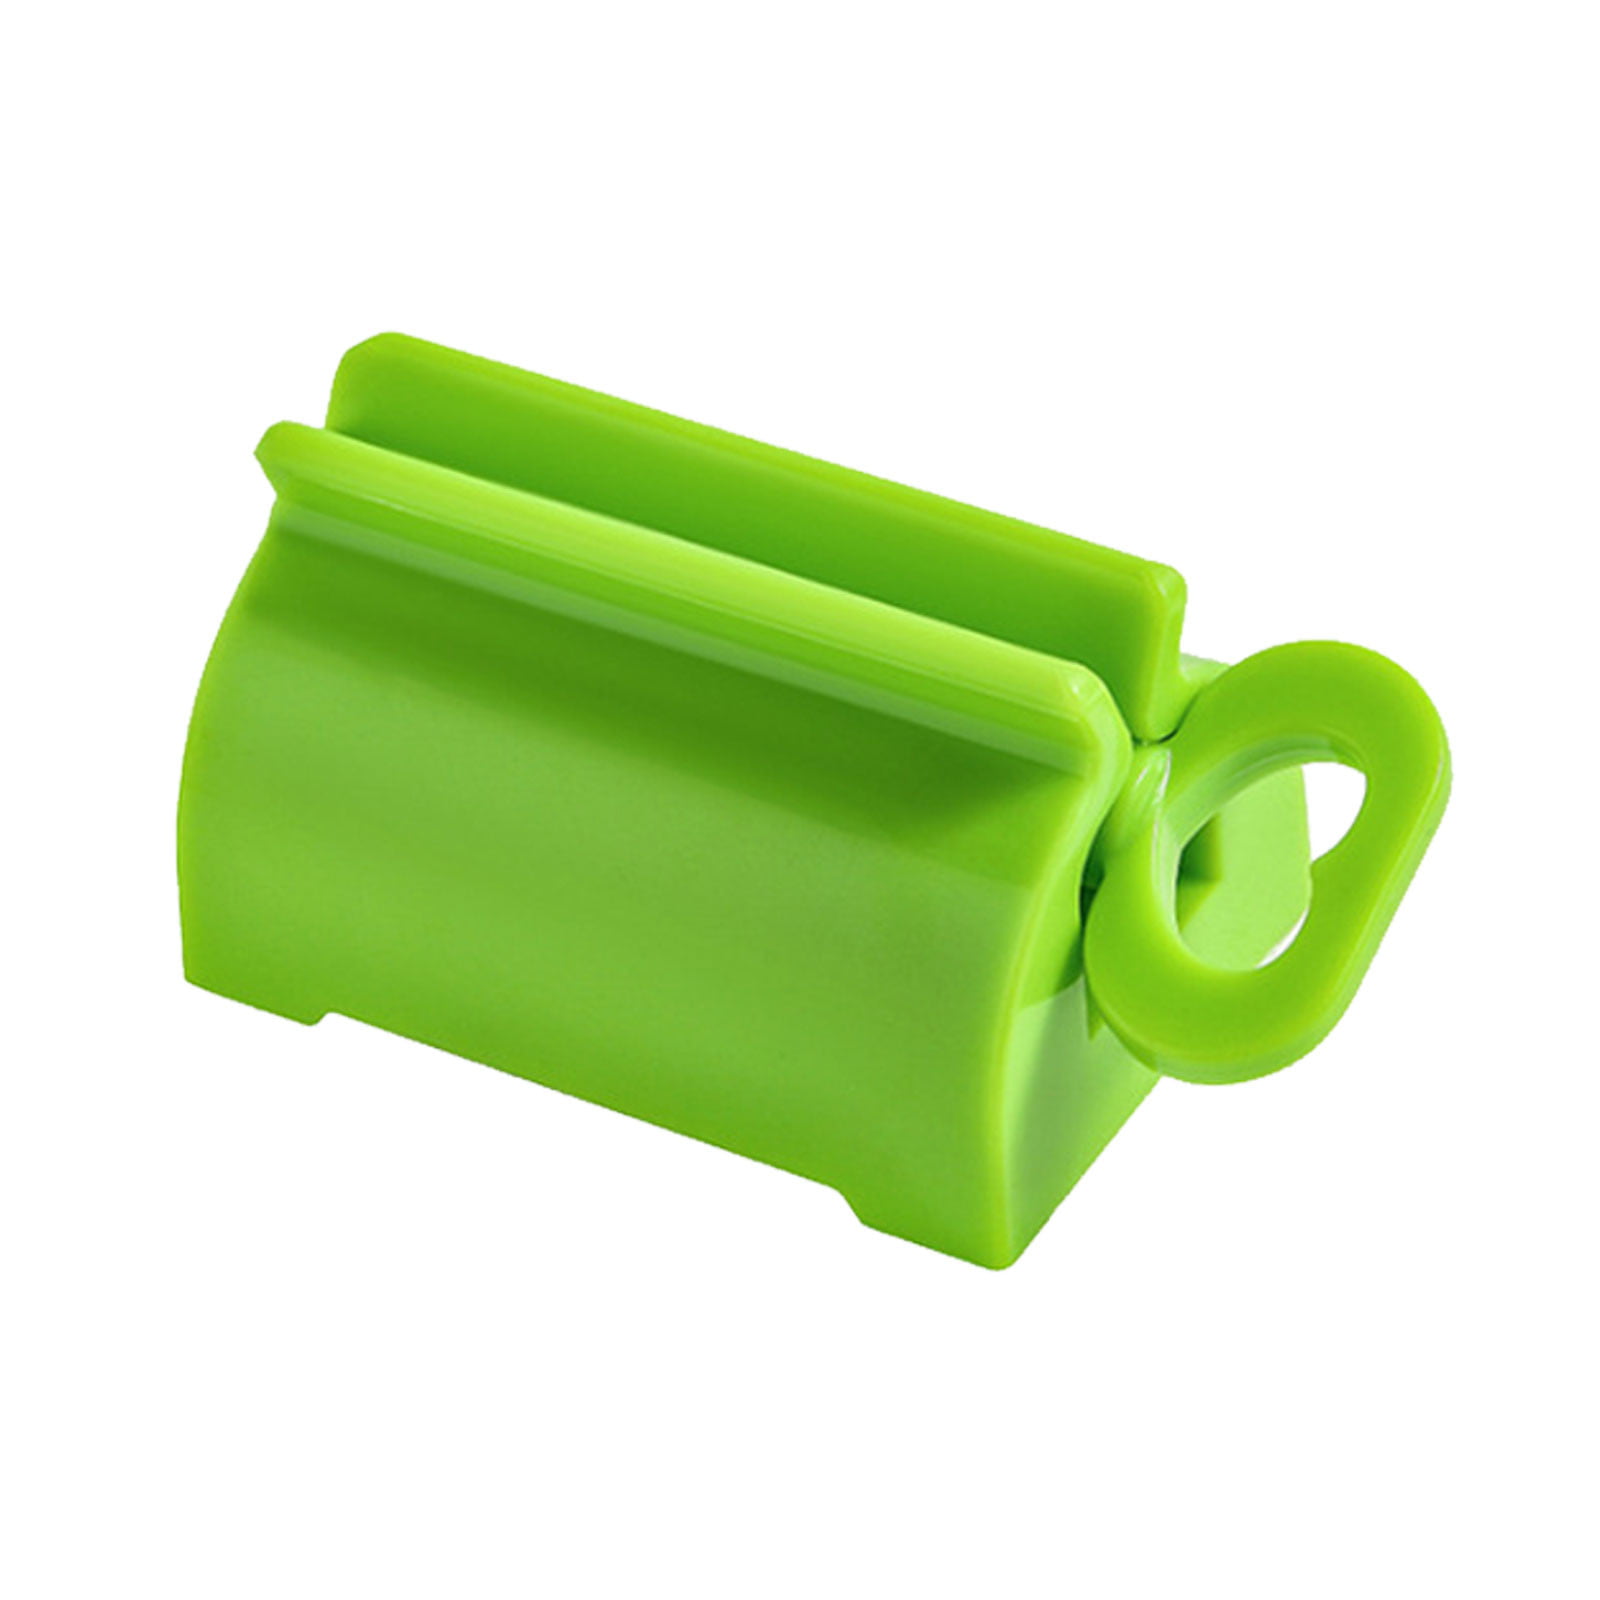 Details about   Plastic Toothpaste Tube Squeezer Easy Dispenser Rolling Holder Bathroom Tools.. 